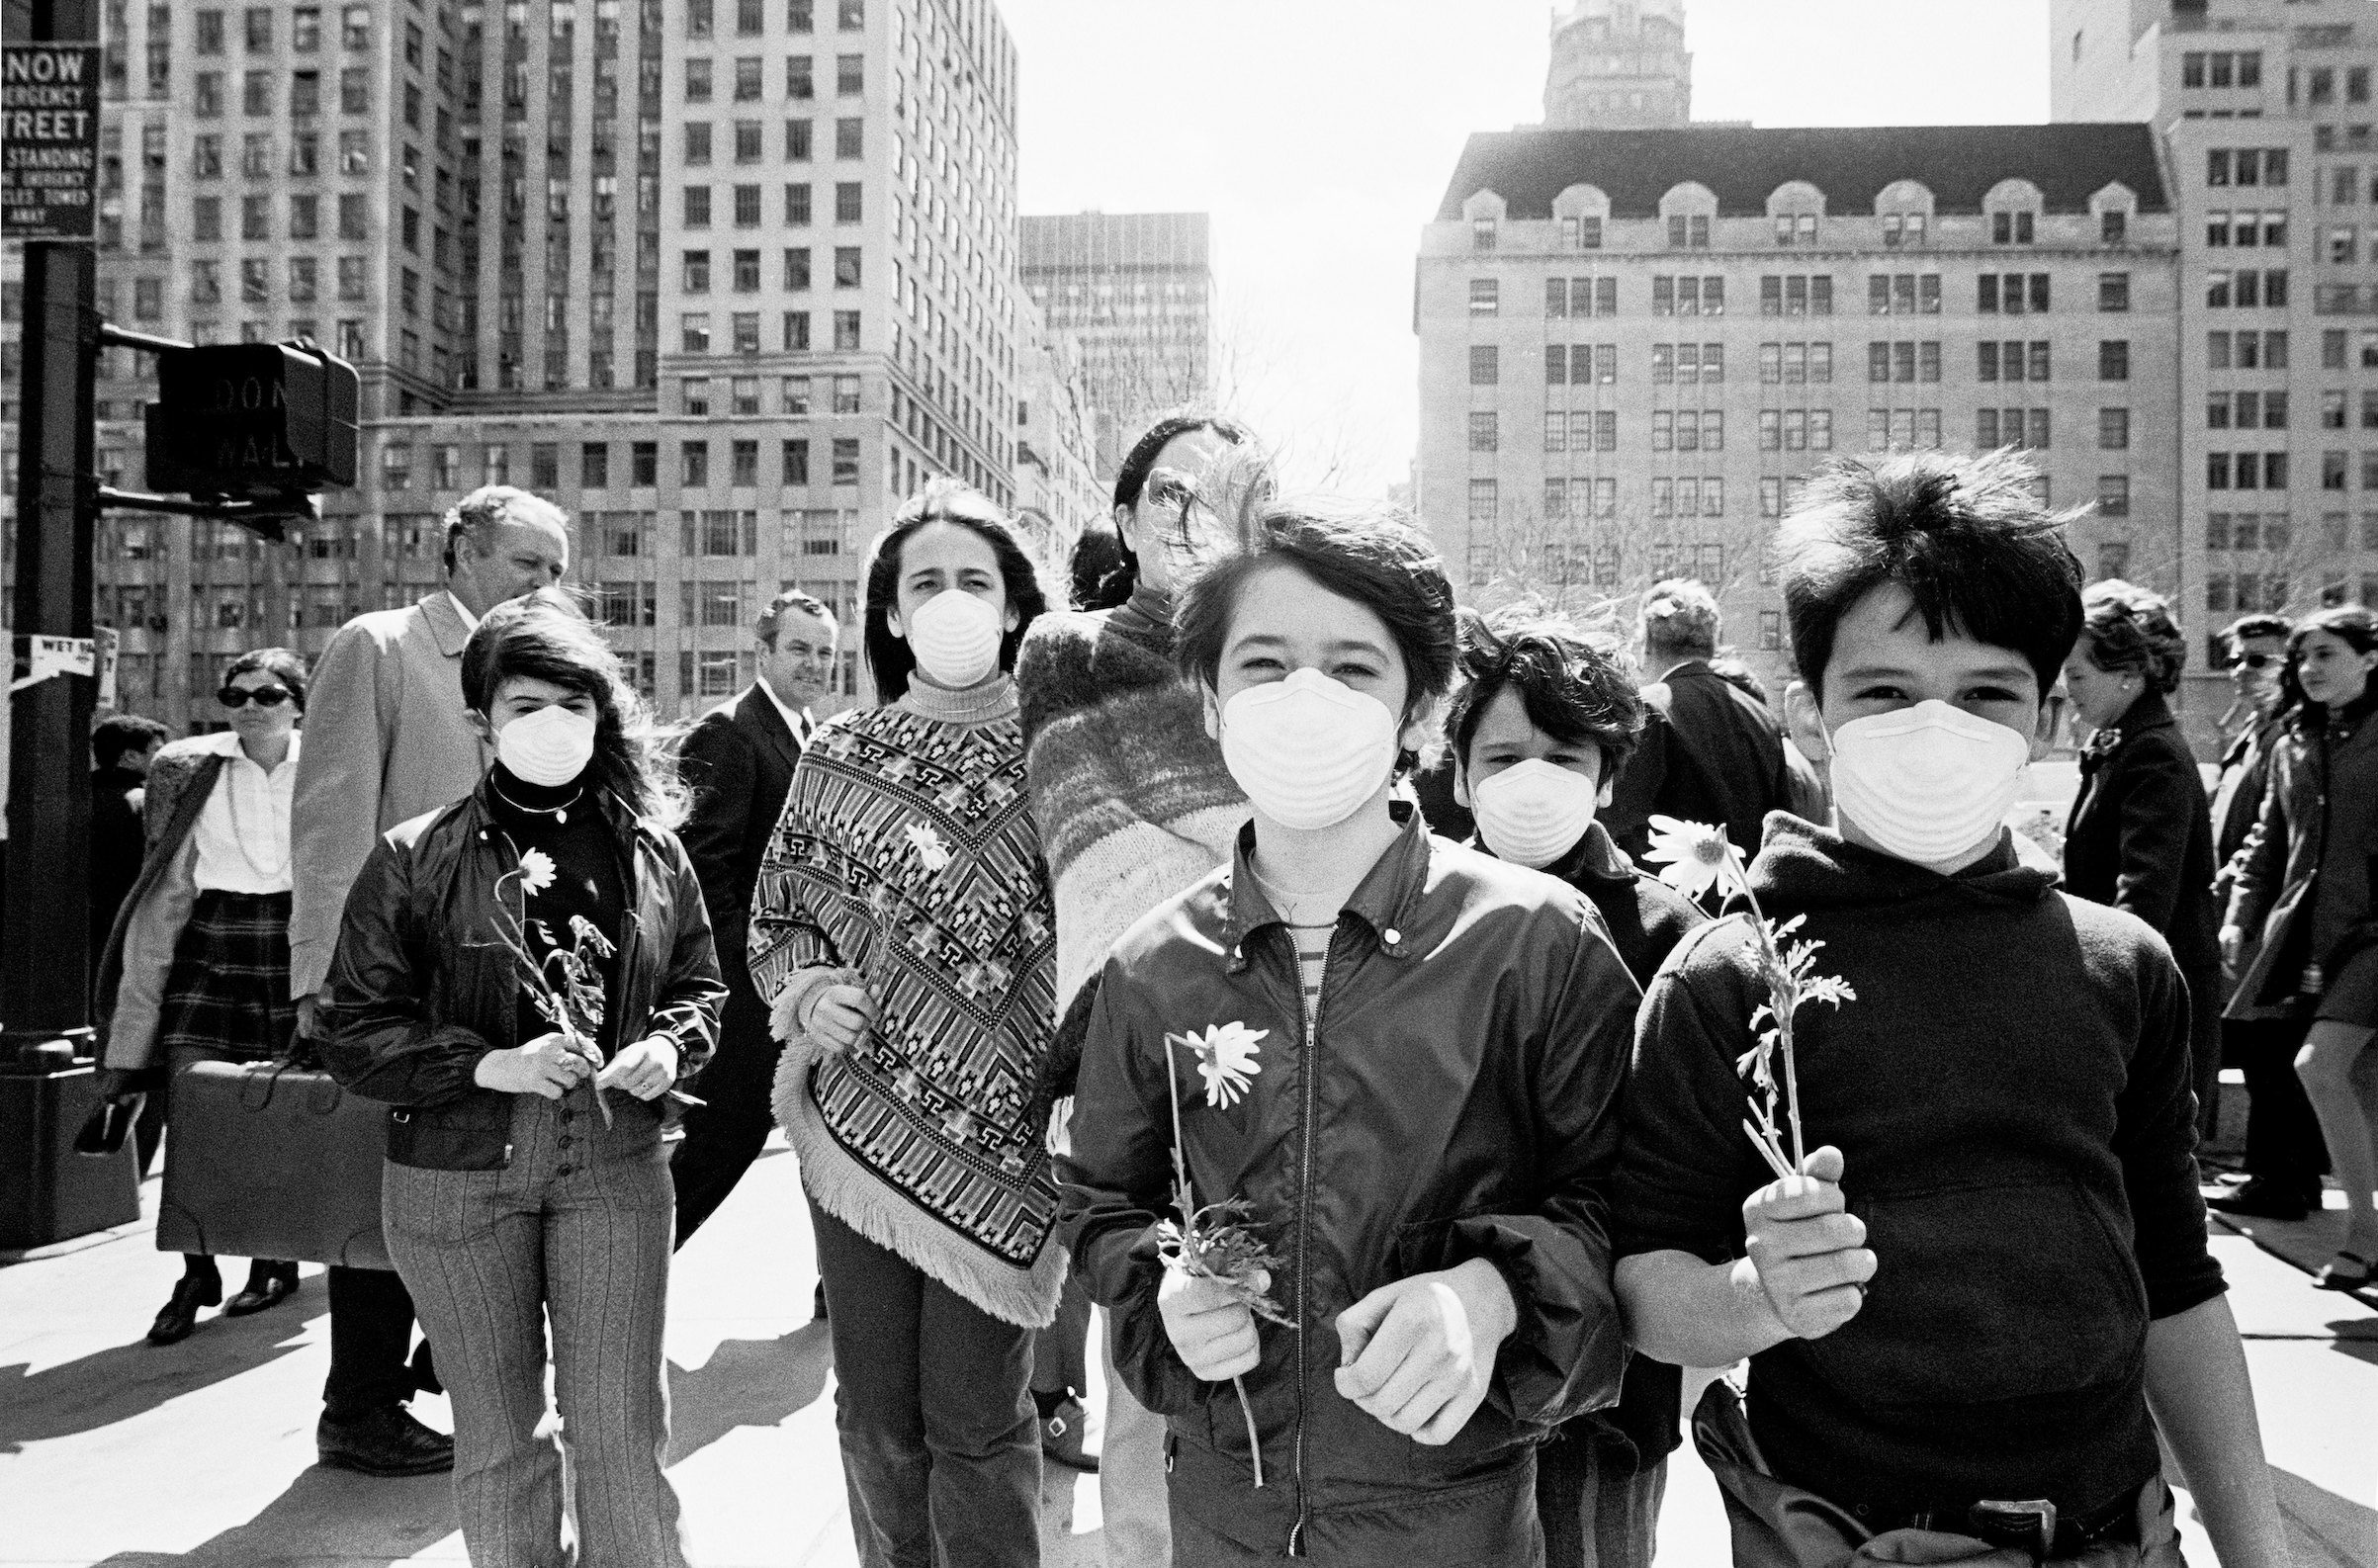 Demonstrators in New York, N.Y., in 1970. Air pollution was a major issue among many who marked the first Earth Day on April 22, 1970. (Santi Visalli/Getty Images)